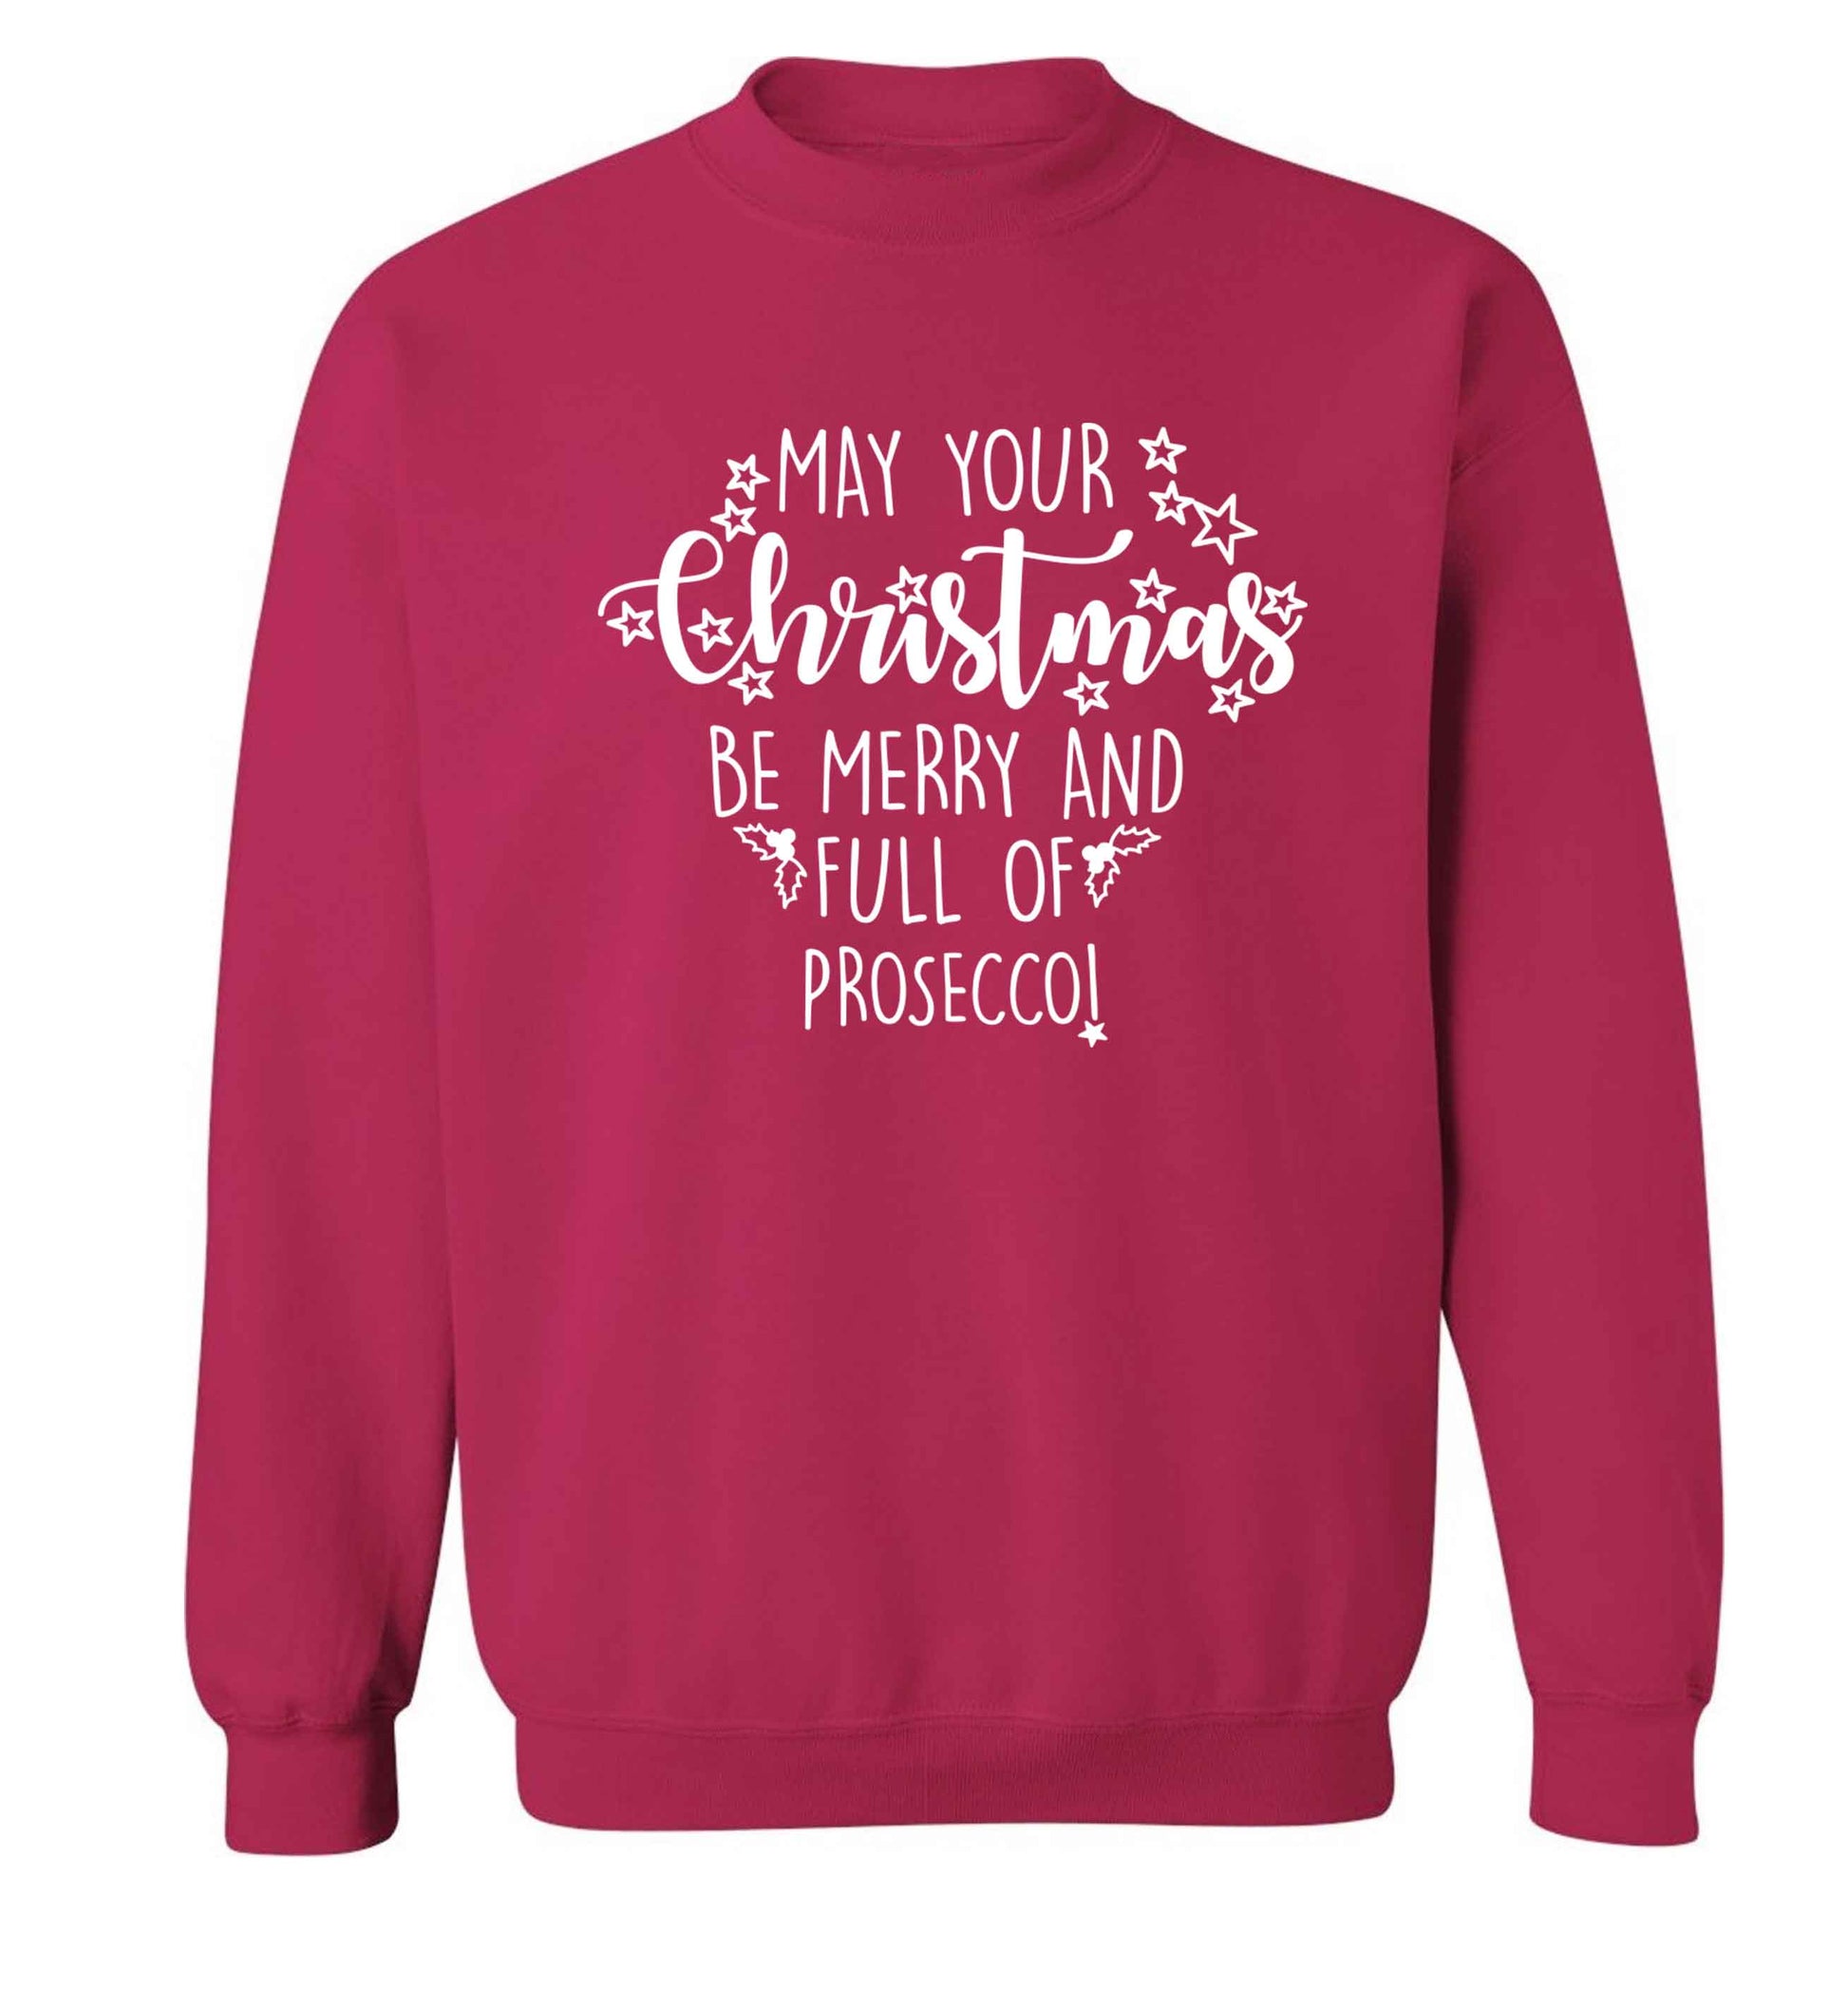 May your Christmas be merry and full of prosecco Adult's unisex pink Sweater 2XL